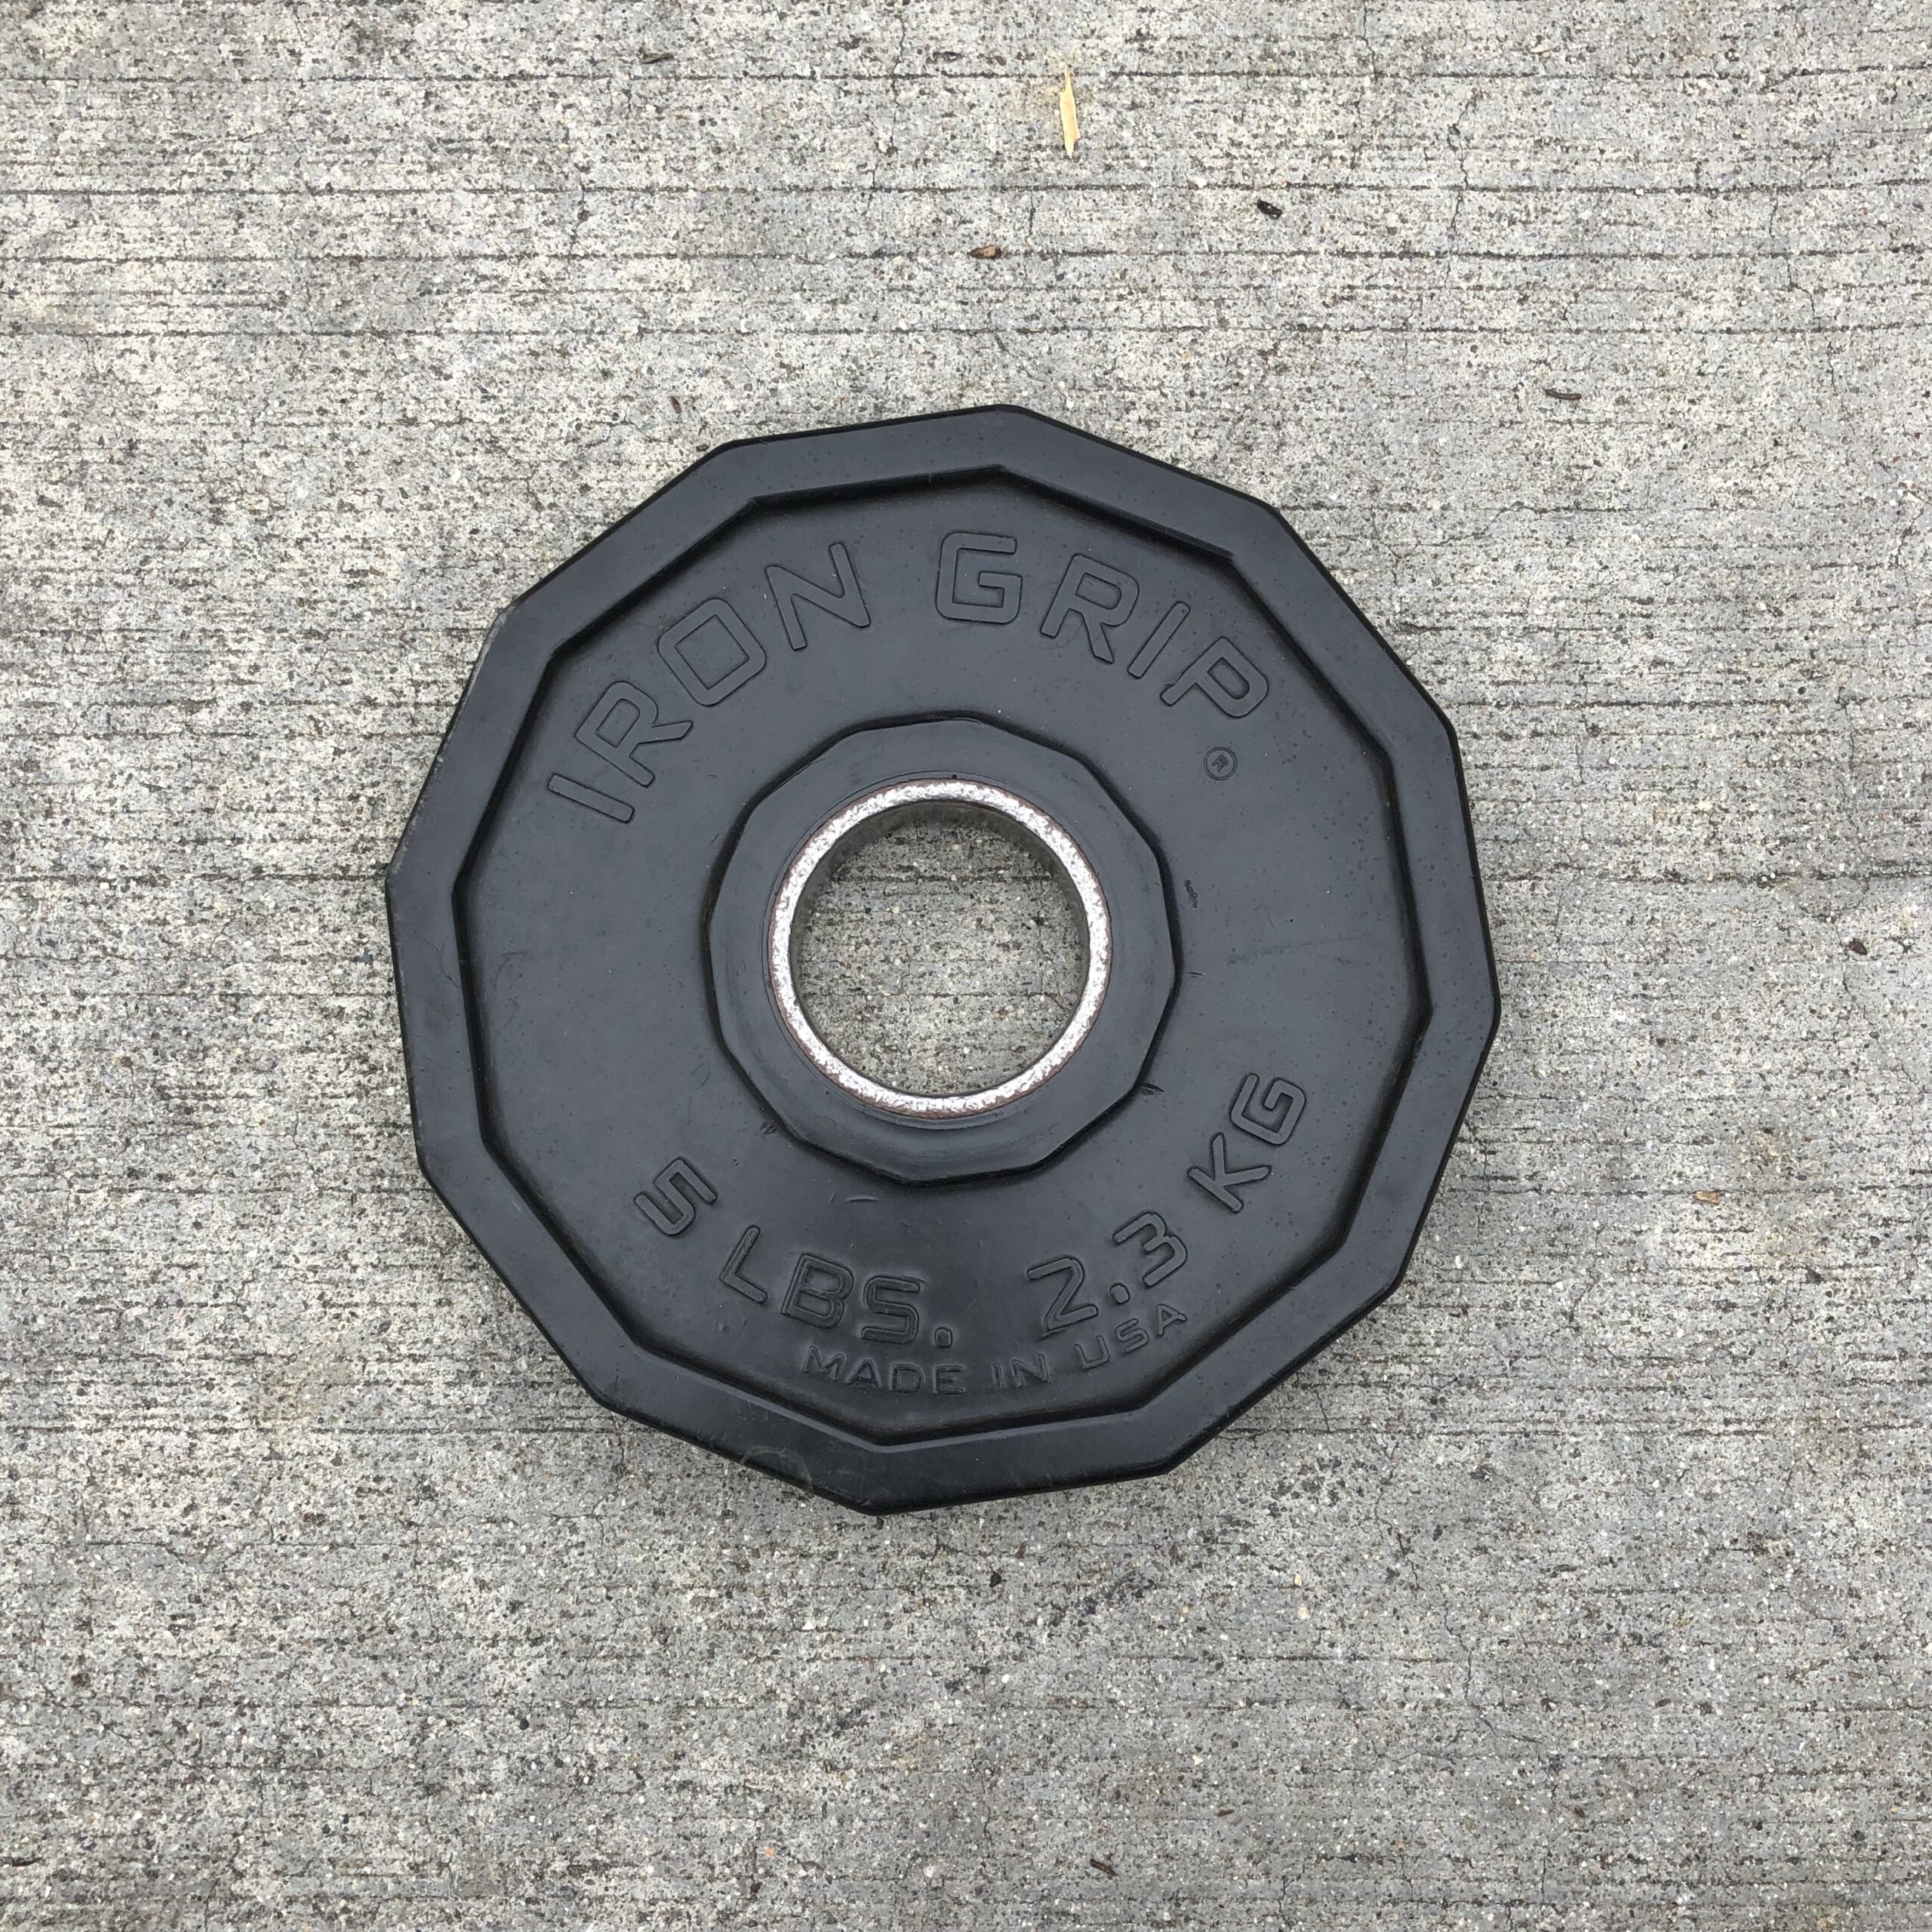 https://primofitnessusa.com/wp-content/uploads/2020/06/Iron-Grip-Rubber-Plate-5lbs-scaled.jpg